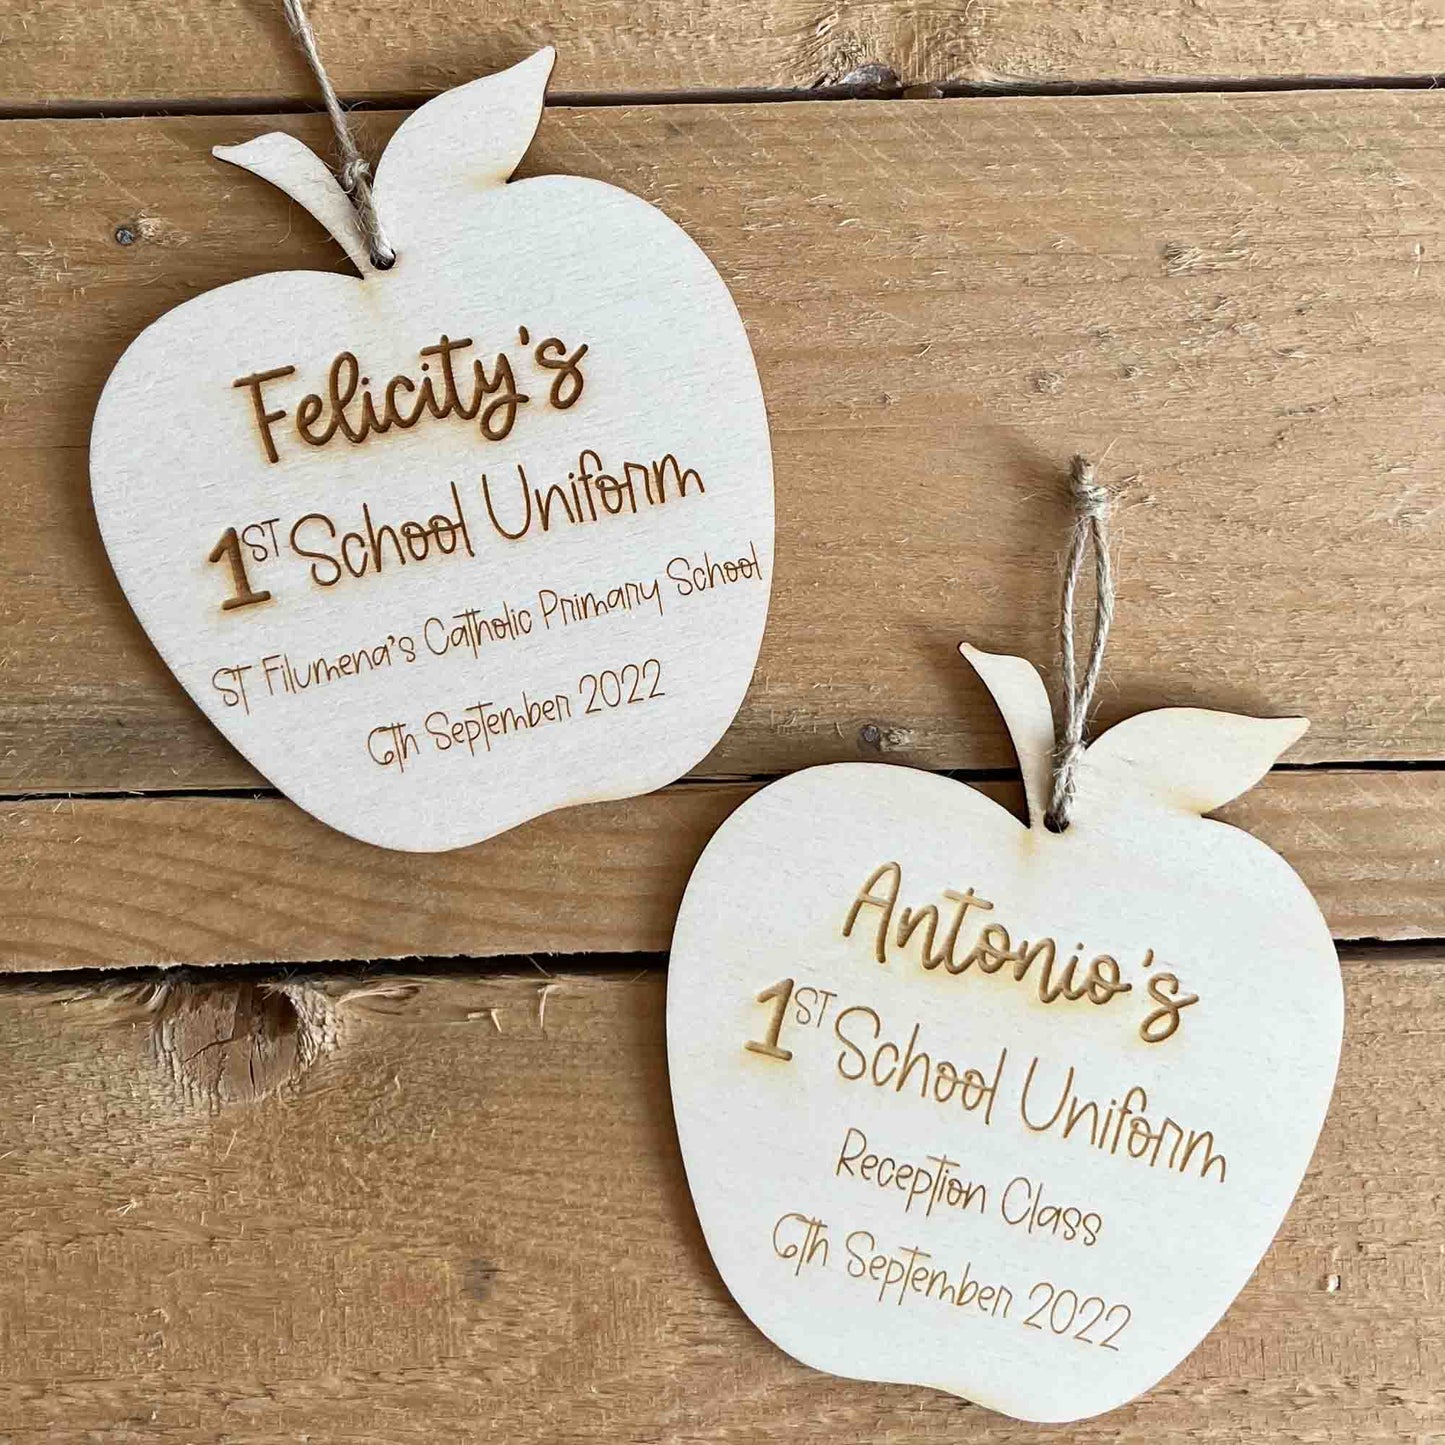 2 different designs for the apple hanger tag for photo props.